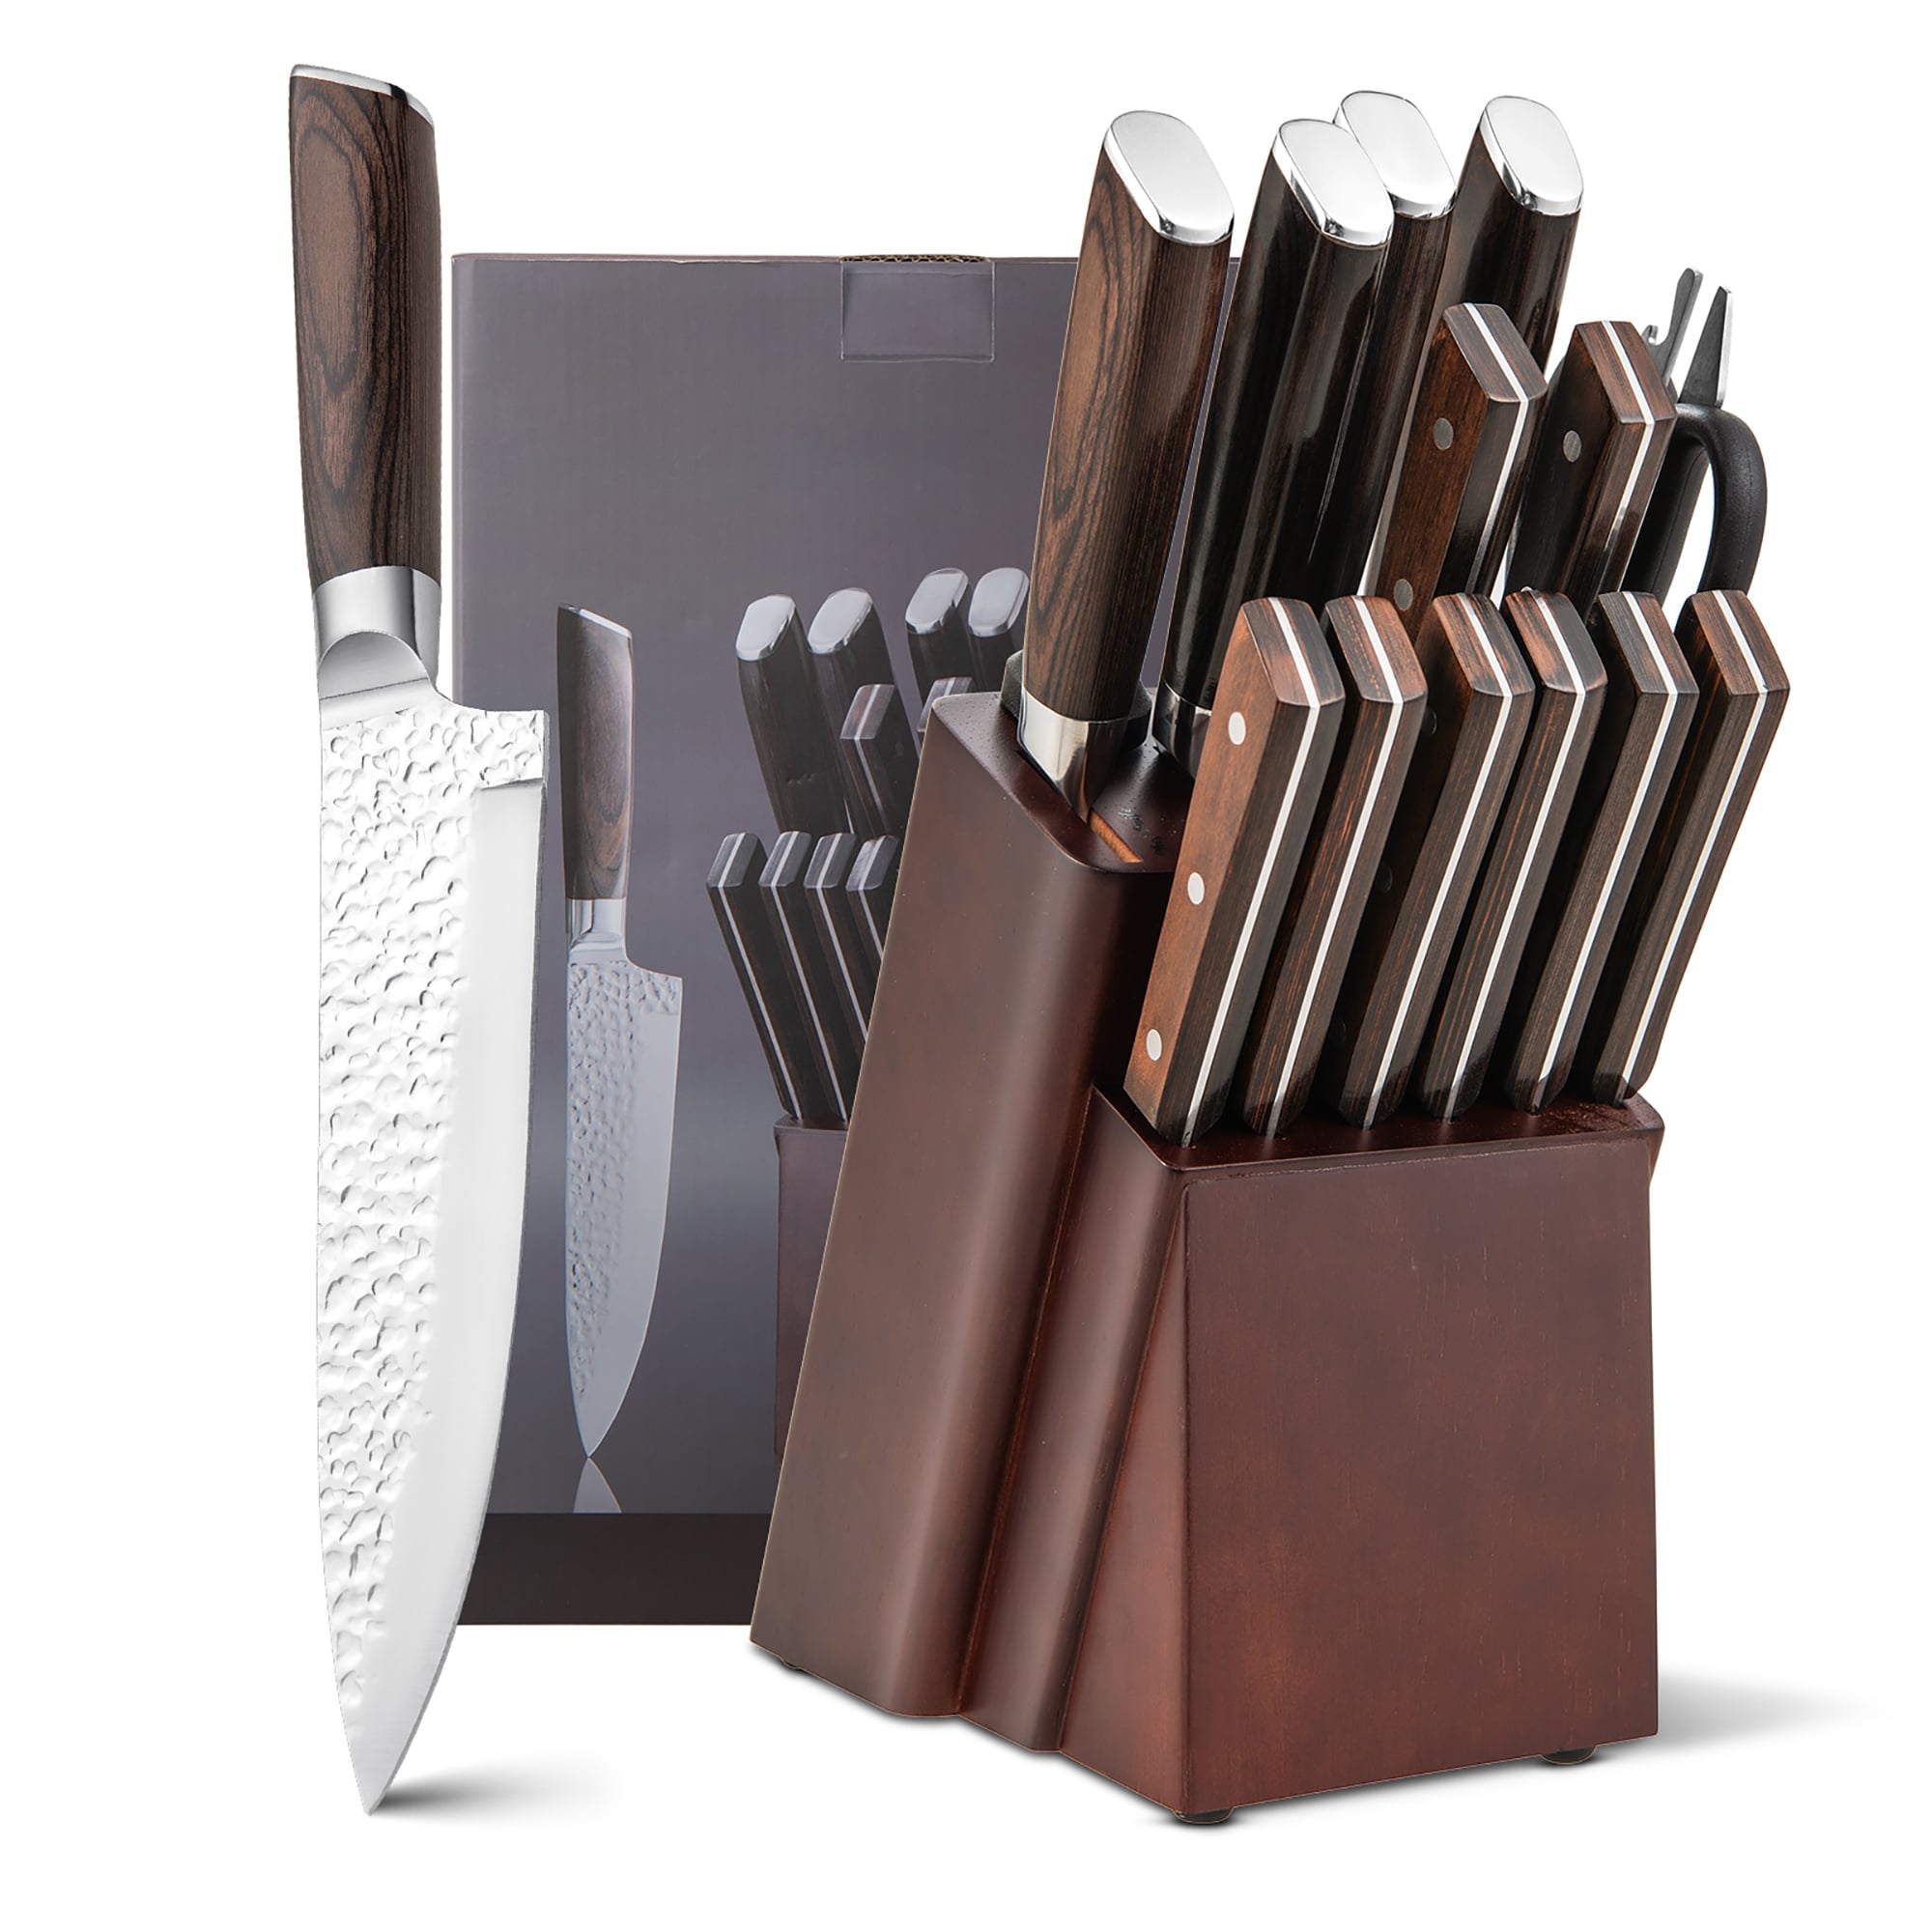 Wolfgang Puck 6-piece Forged Cutlery Set with Magnetic Block